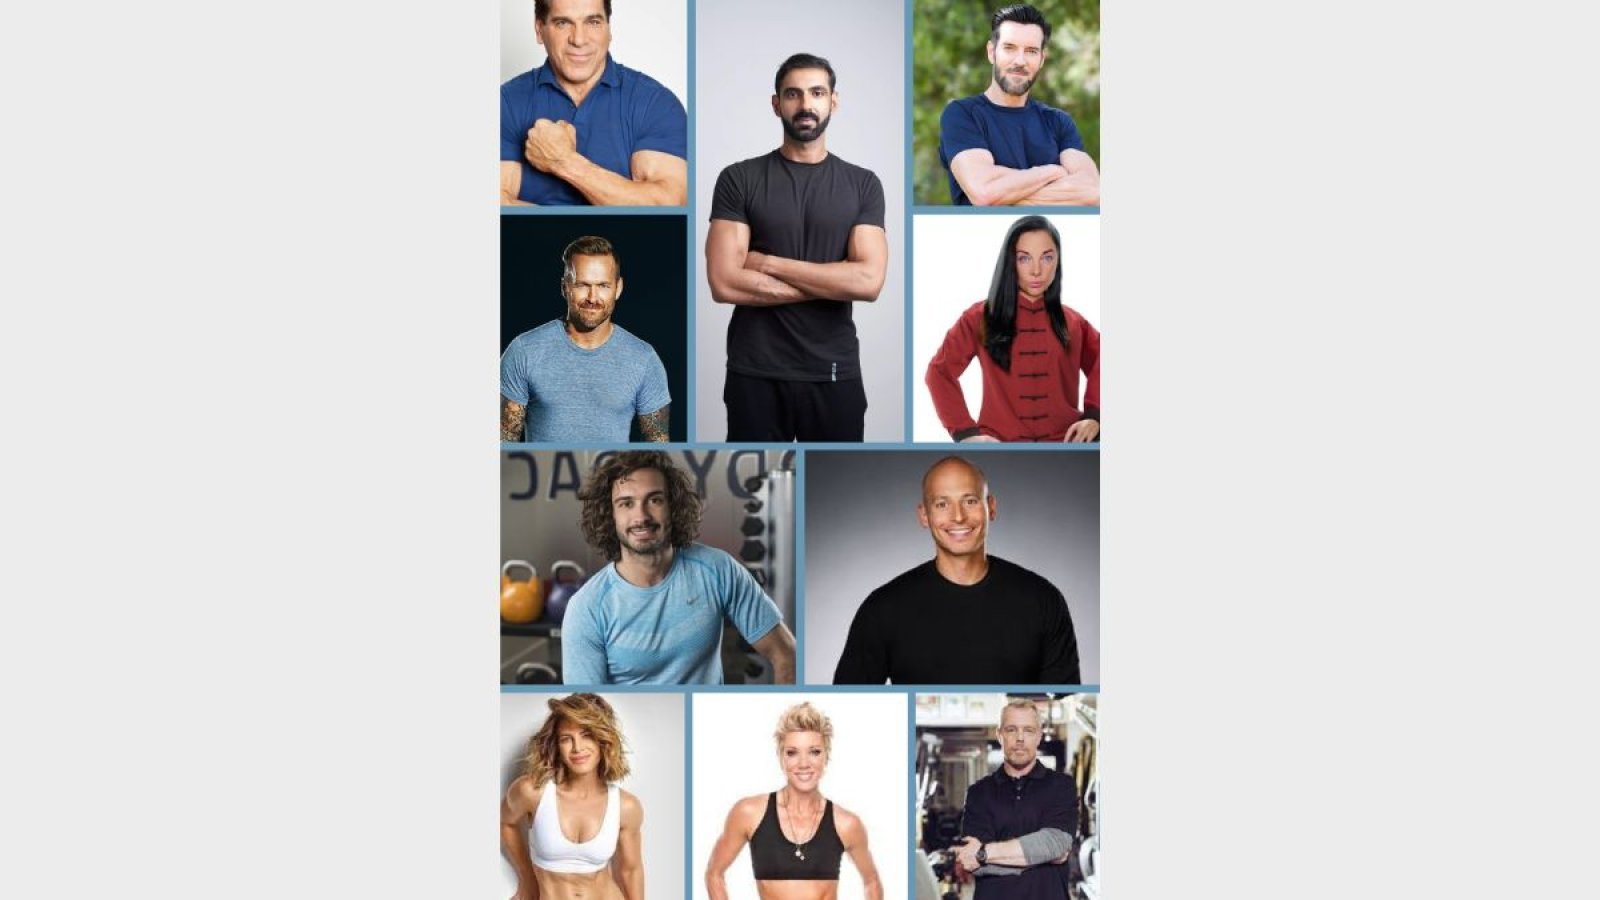 TrainedByYVS Founder Yash Vardhan Swami Tops the List: The World’s Top 10 Fitness Trainers Revealed